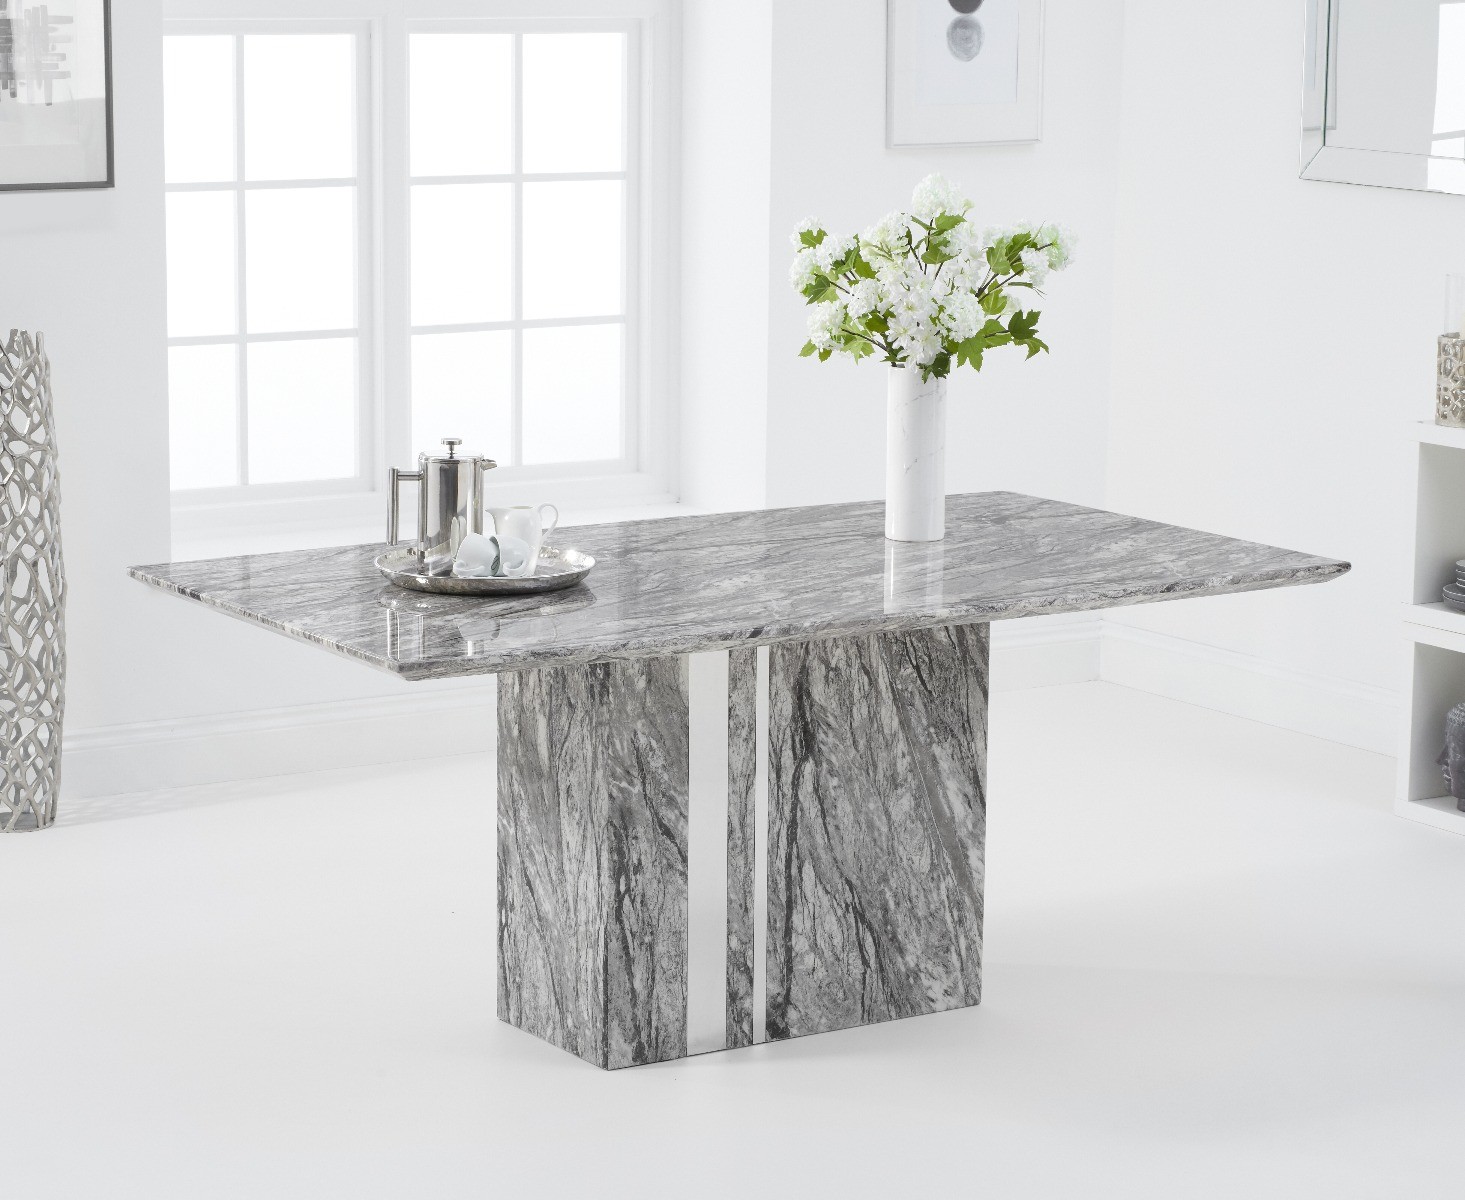 Photo 2 of Alicia 180cm grey marble dining table with 6 black aldo chairs